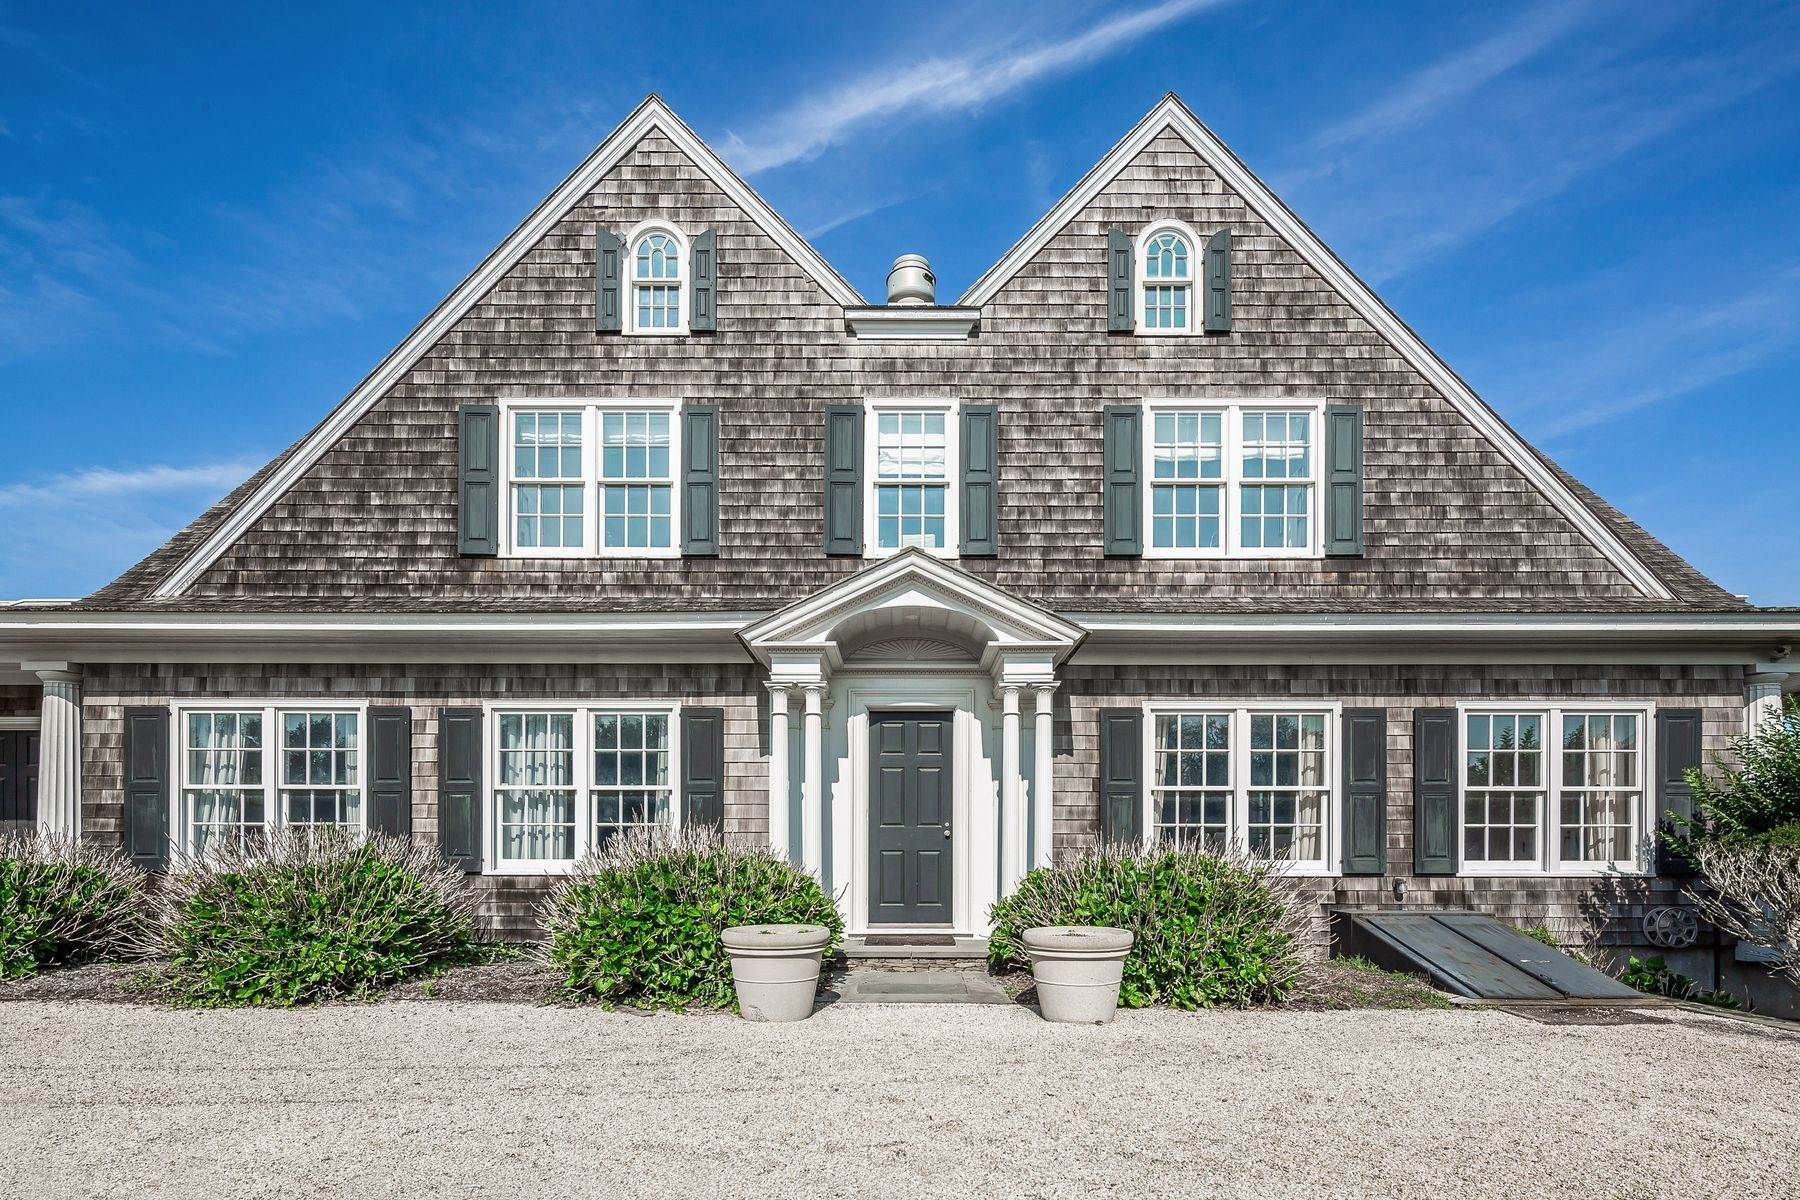 14. Single Family Homes for Sale at 366 & 376 GIN LANE, SOUTHAMPTON 366 & 376 GIN LANE, SOUTHAMPTON, Southampton, New York 11968 United States